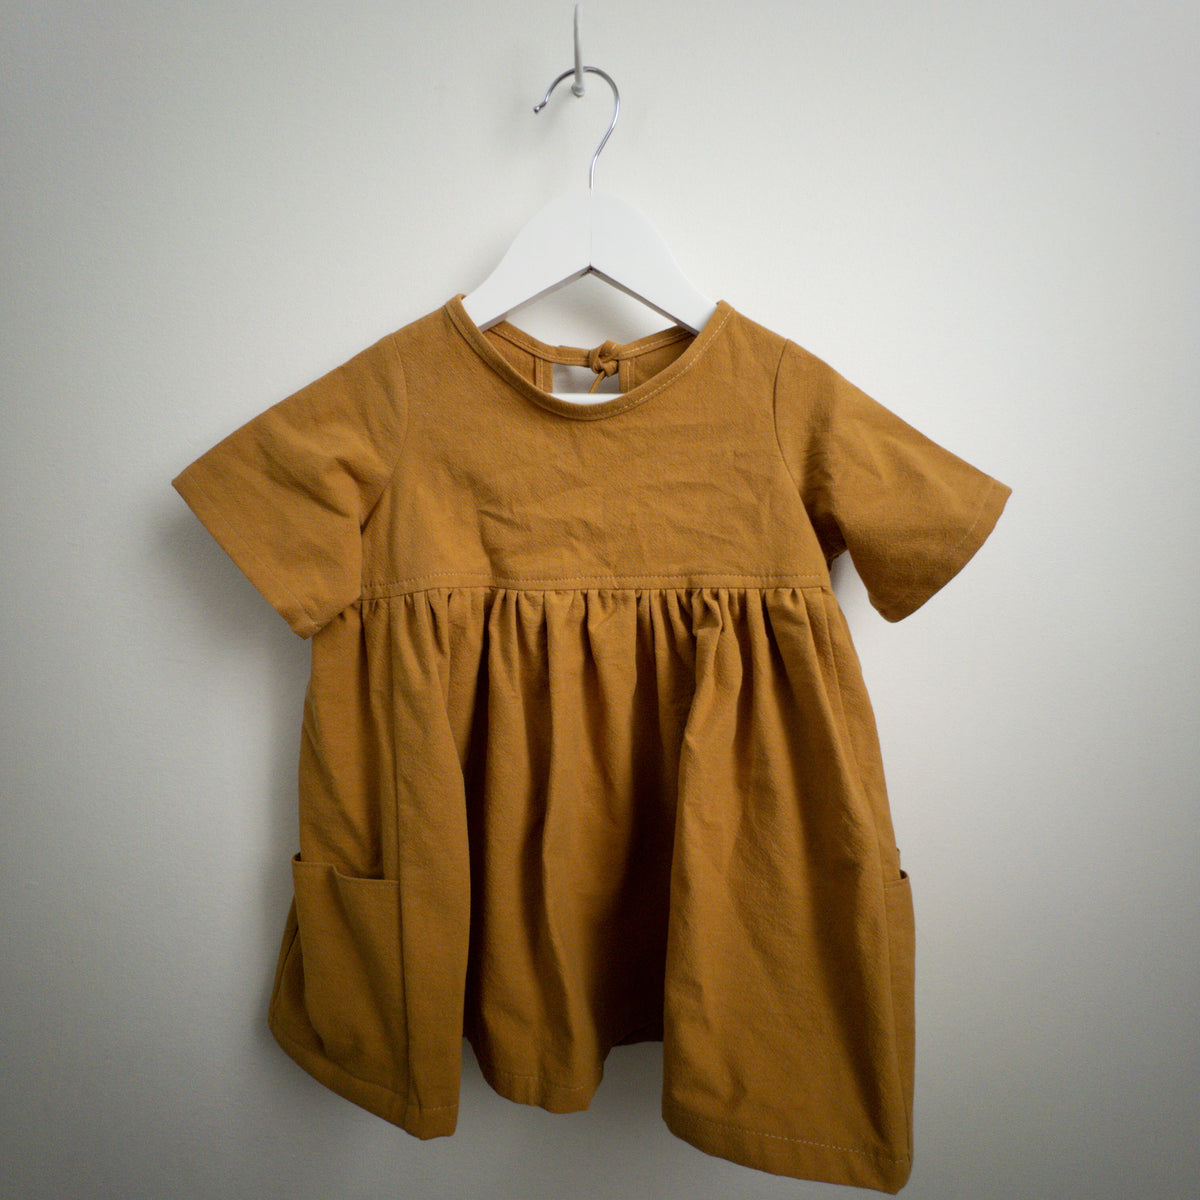 Nora Short-Sleeved Tunic with  Pockets in 'Saffron Crepe' - Ready To Ship